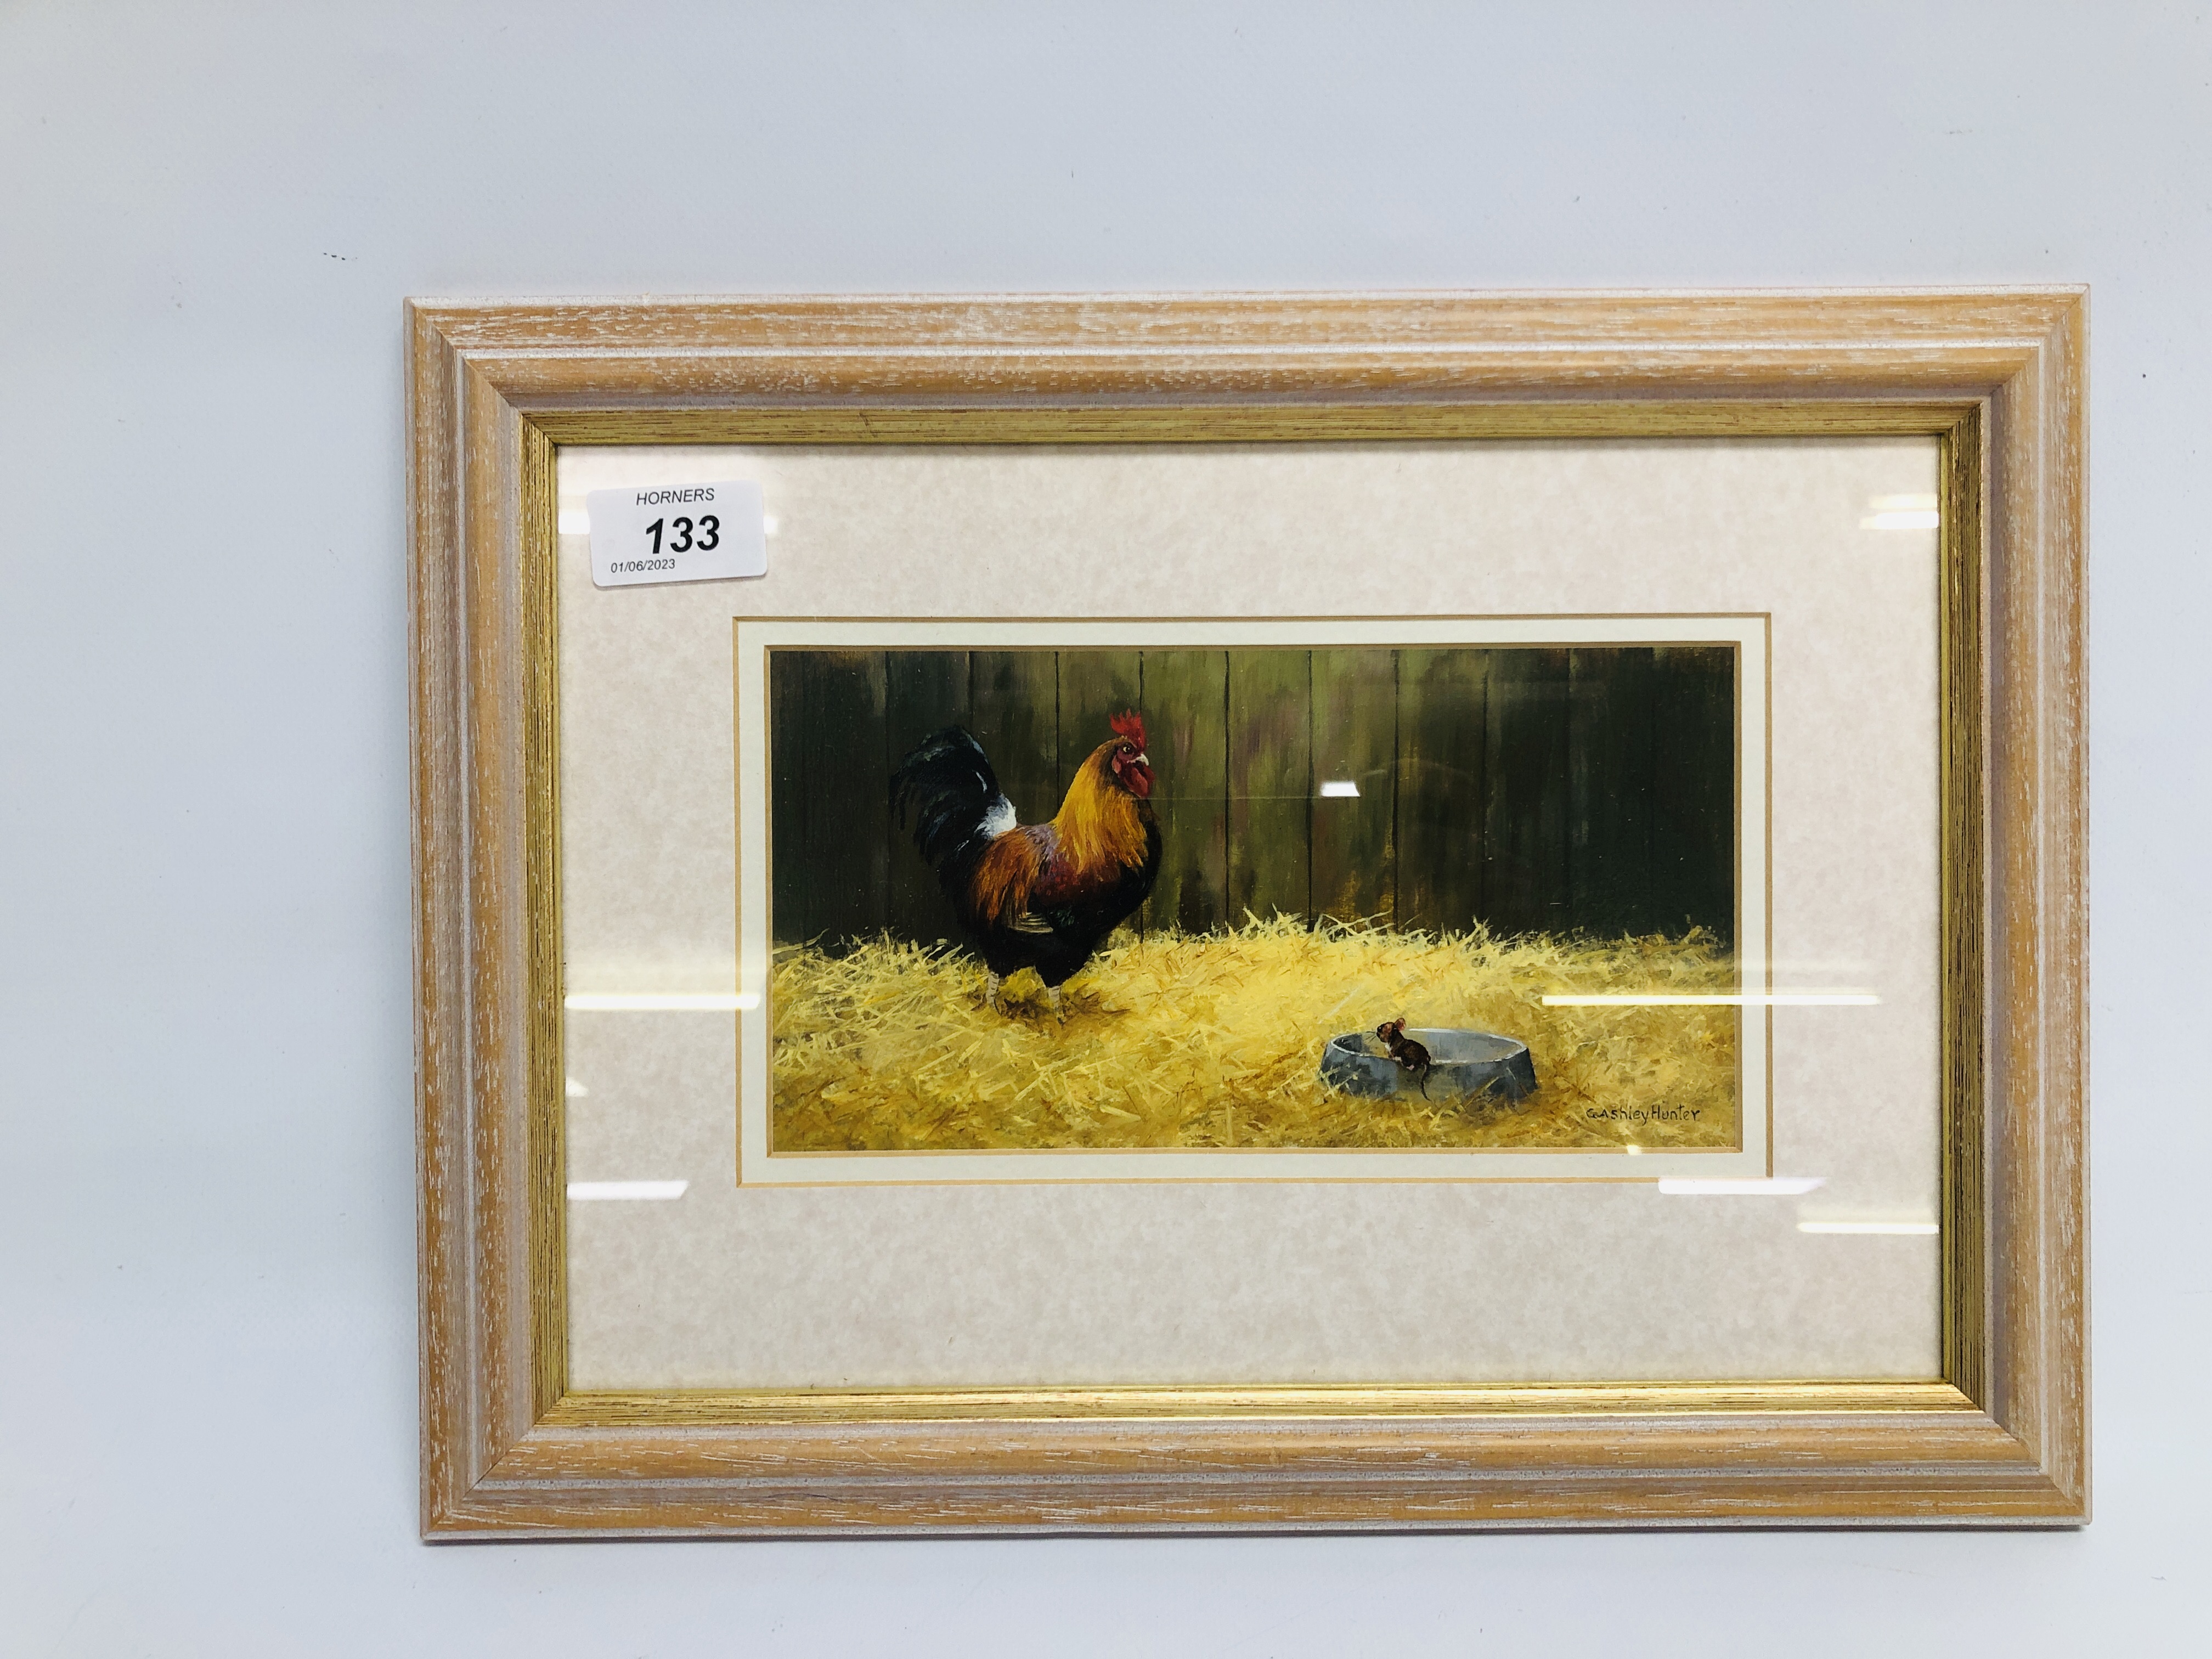 OIL ON BOARD "LOOKING FOR SCRAPS" BEARING SIGNATURE G ASHLEY HUNTER HEIGHT 11CM. X 21.5CM.